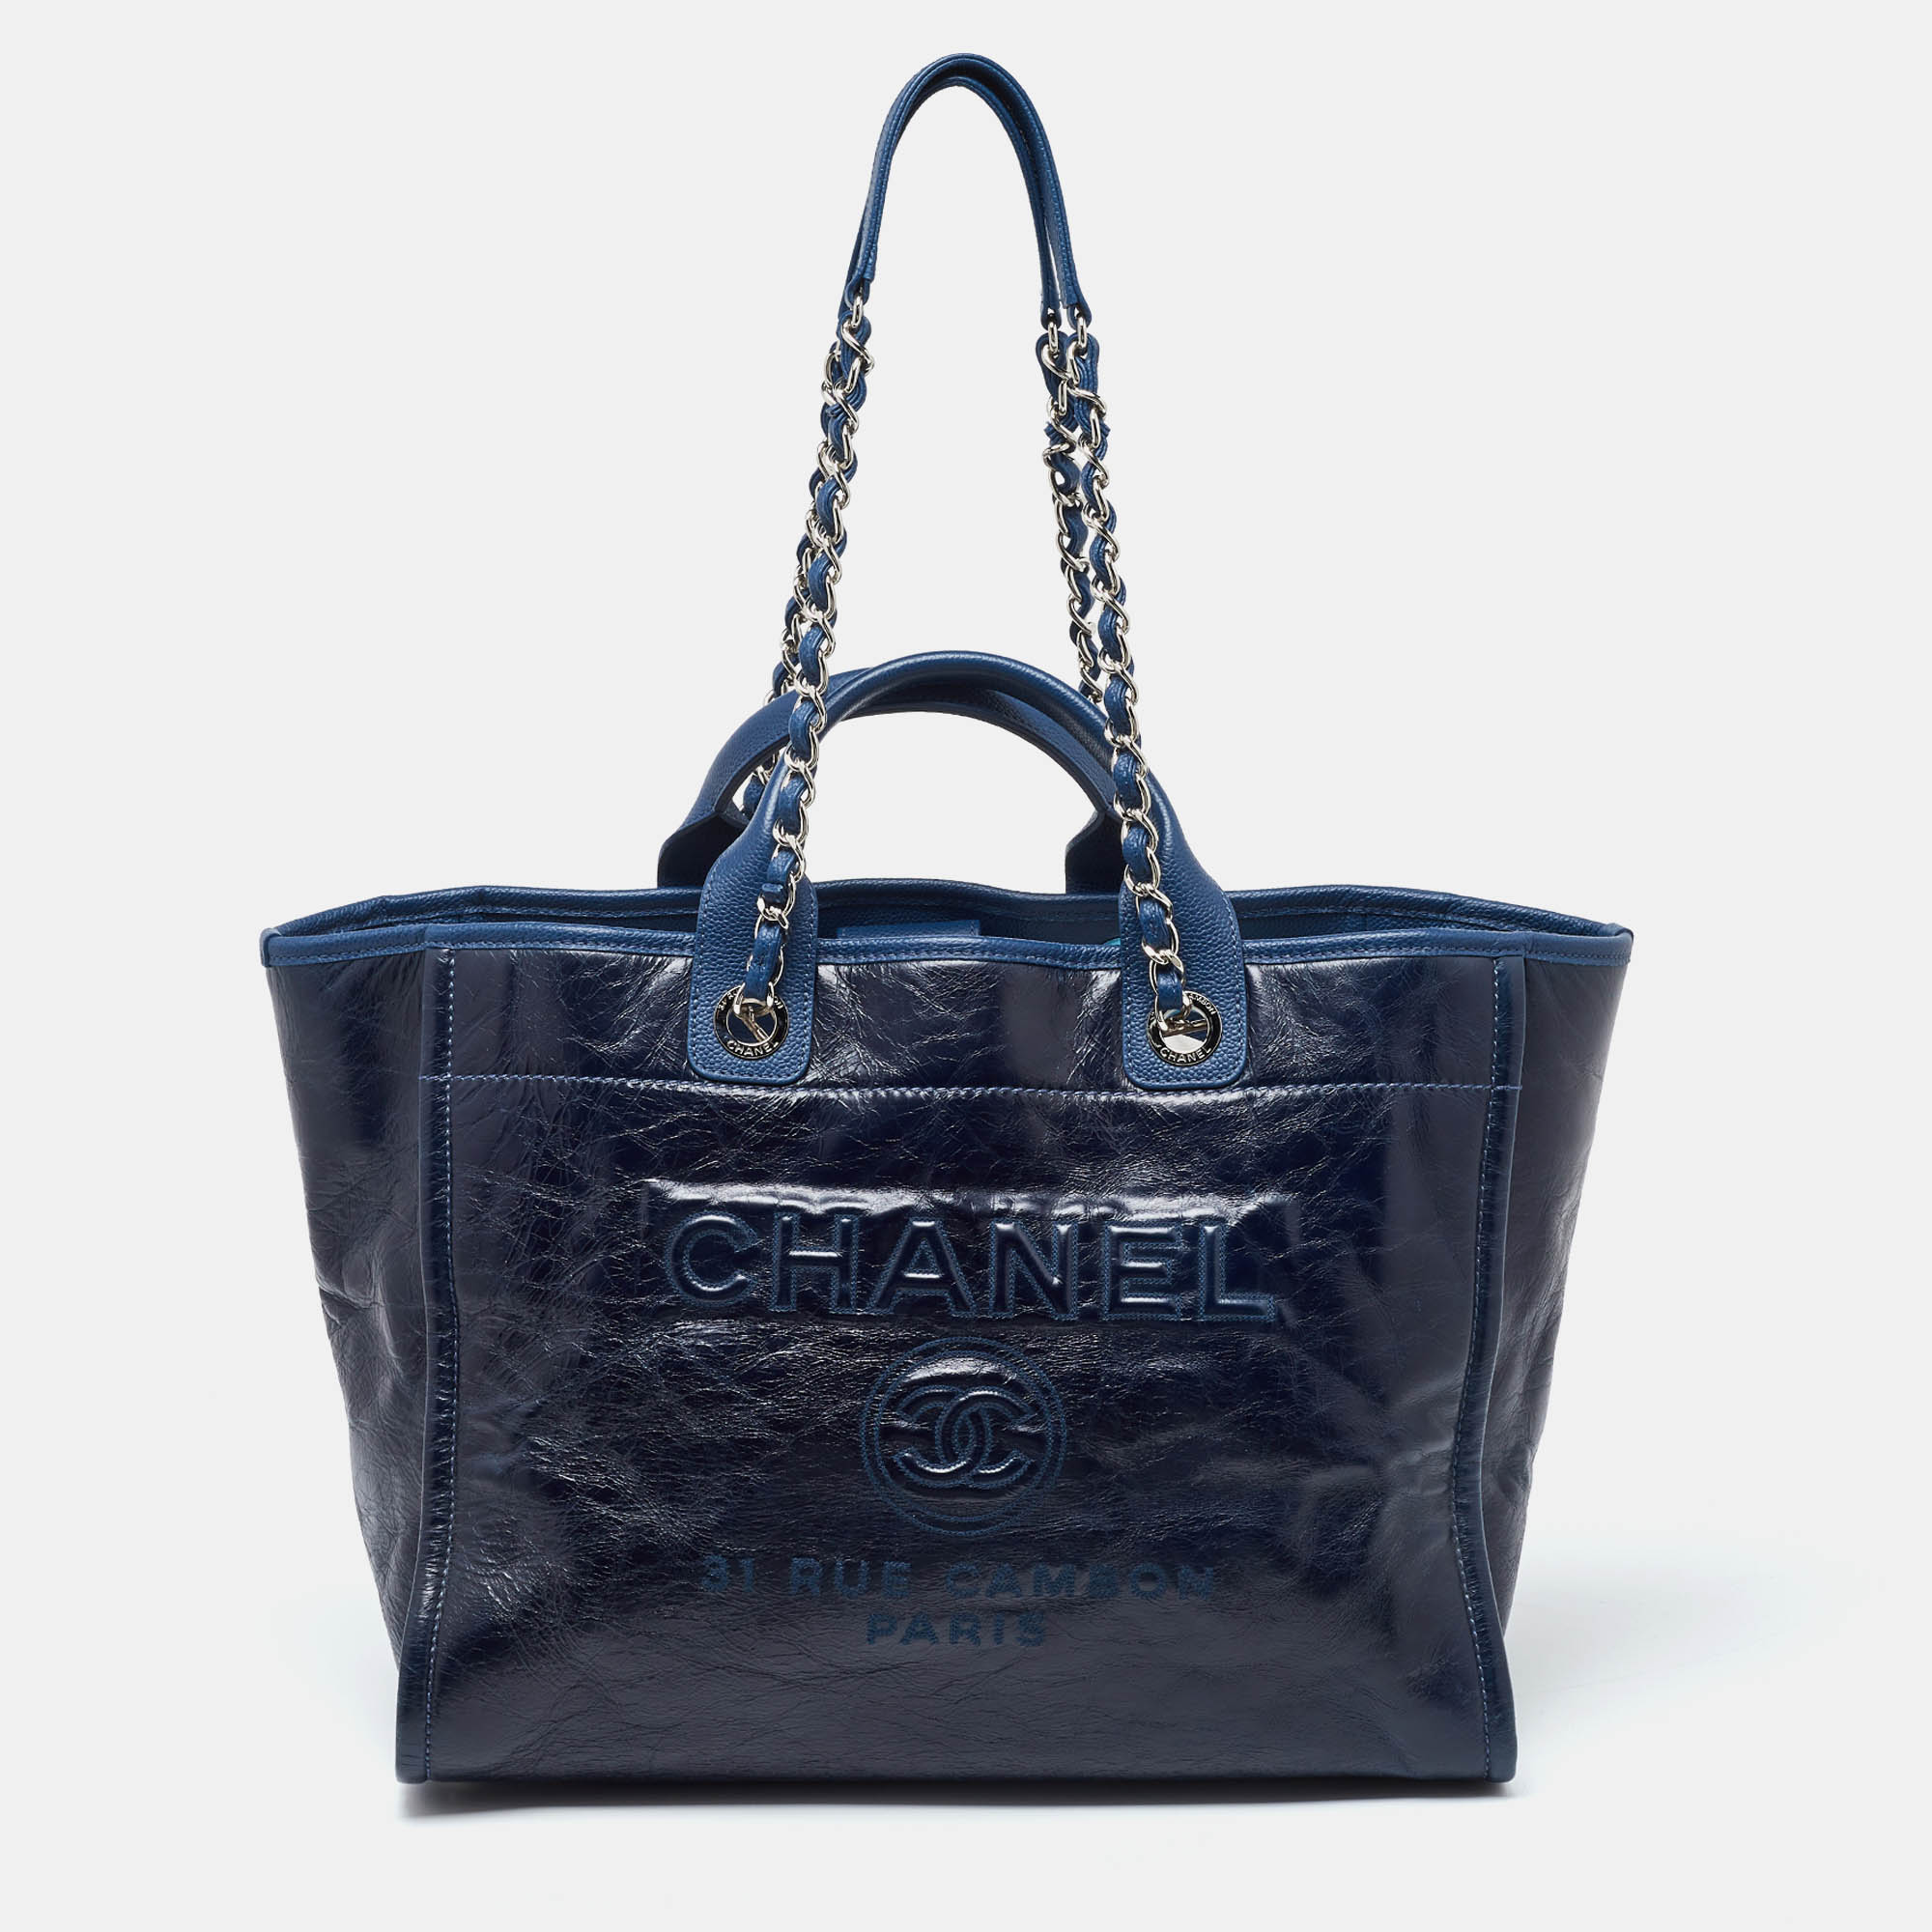 Pre-owned Chanel Navy Blue Leather Large Deauville Tote